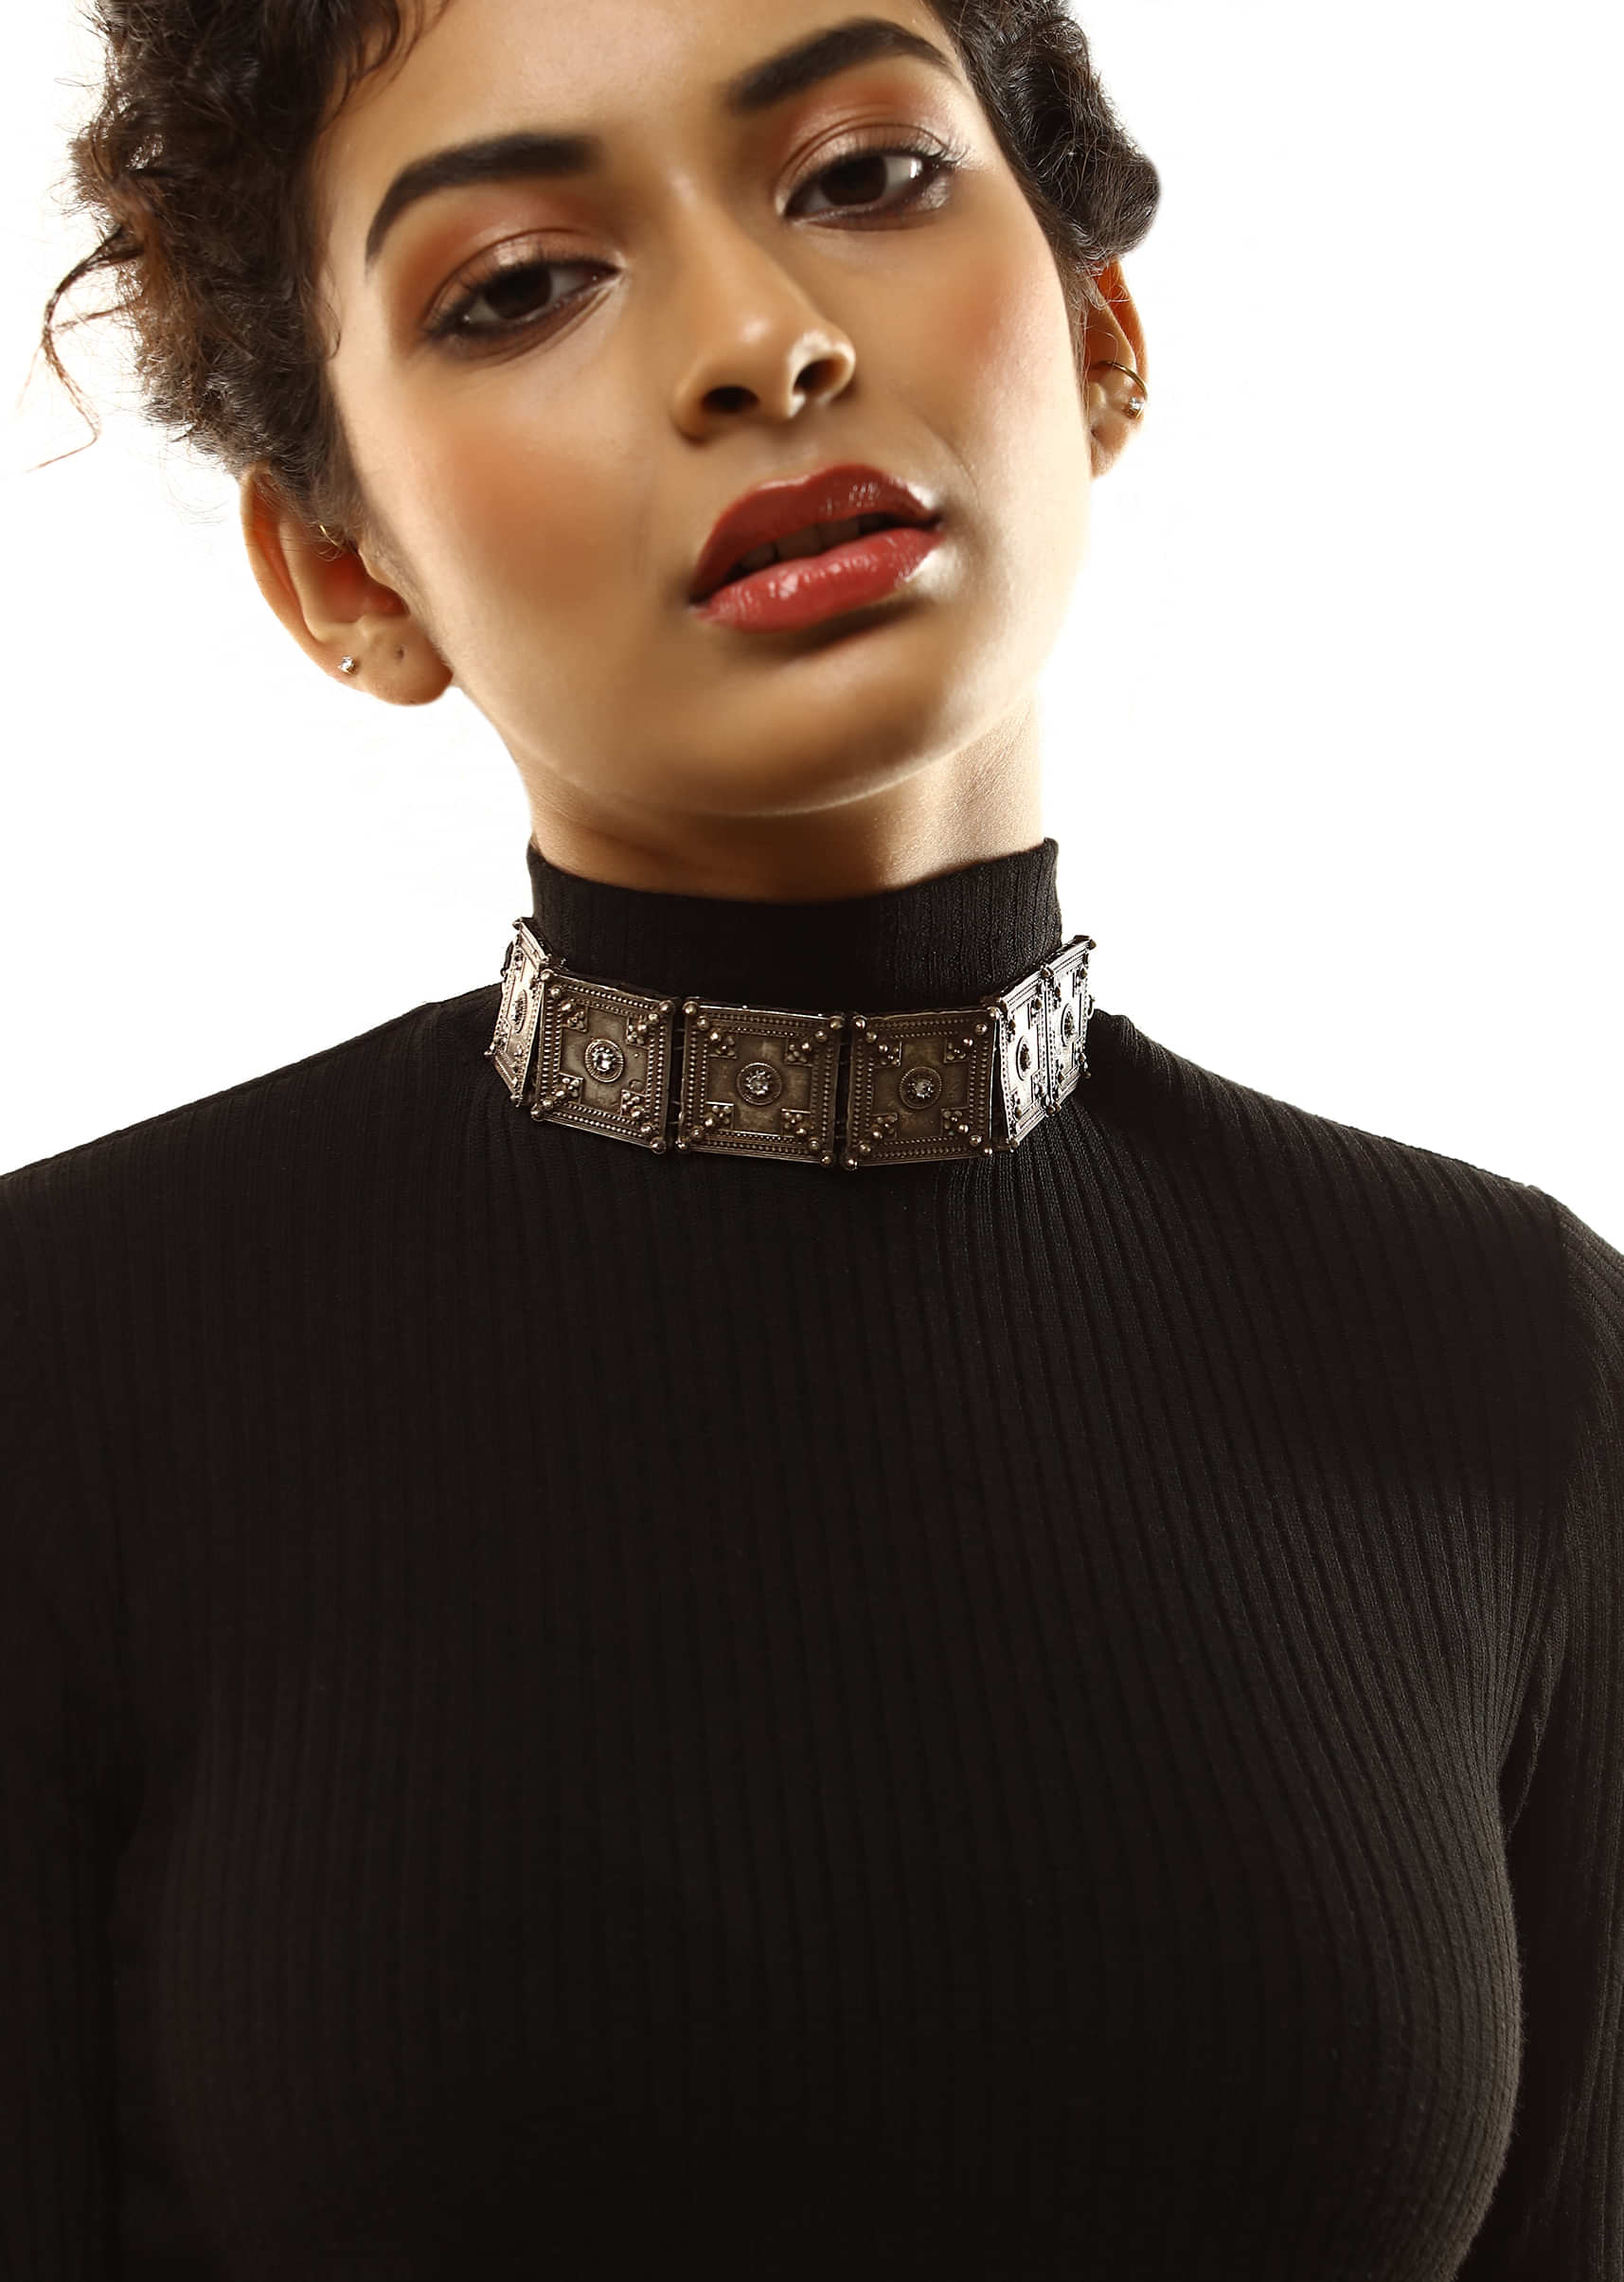 Oxidised Choker Featuring Carved Square Motifs With Swarovski In The Centre 